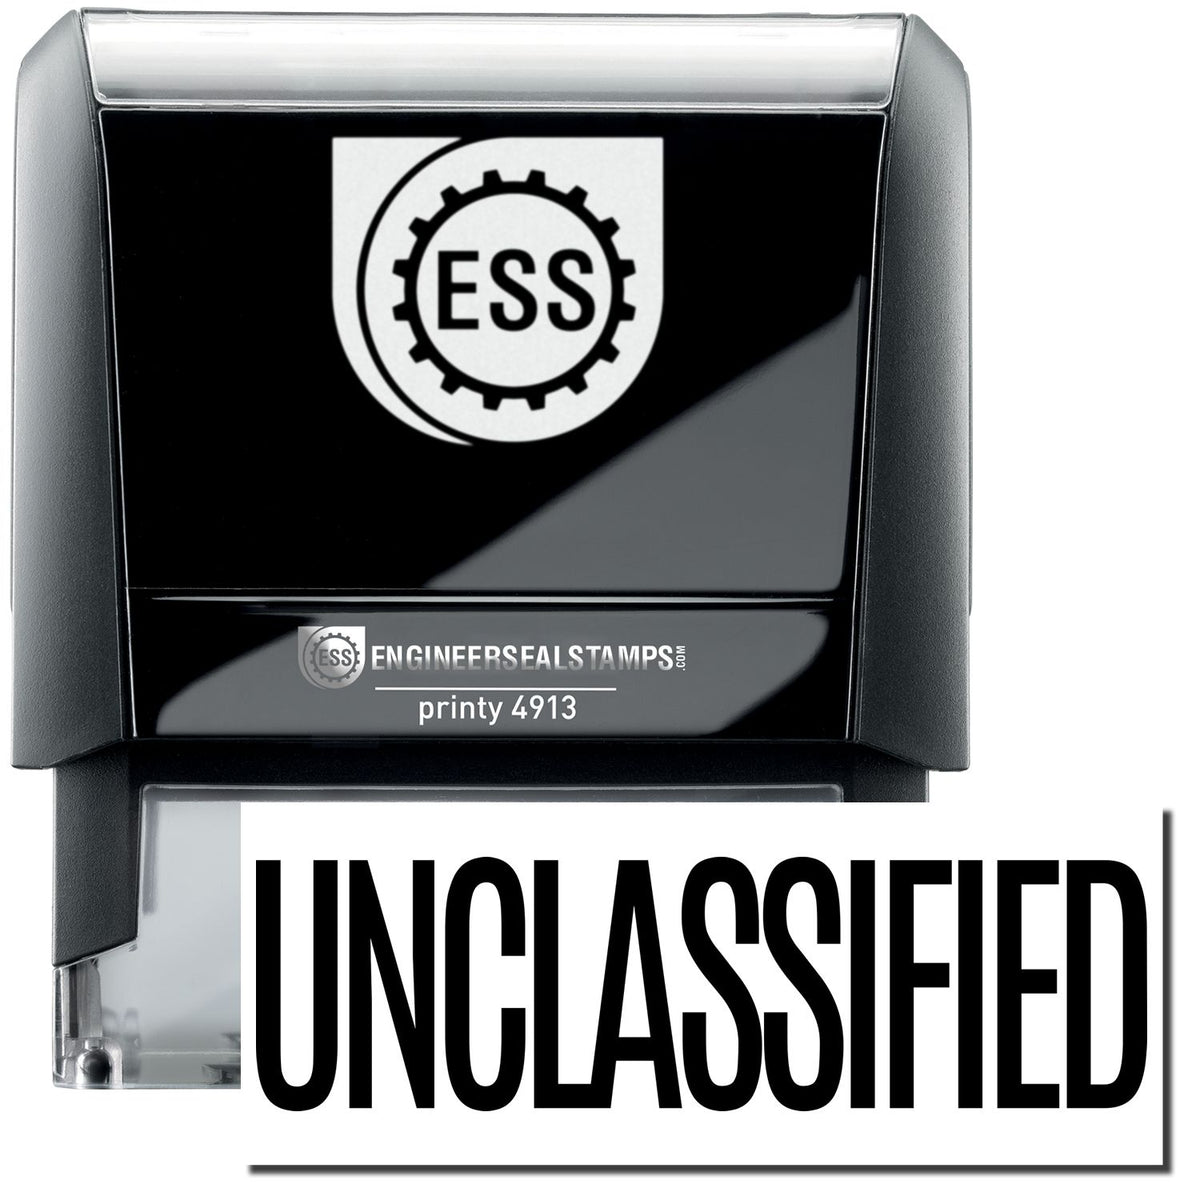 A self-inking stamp with a stamped image showing how the text &quot;UNCLASSIFIED&quot; in a large font is displayed by it after stamping.